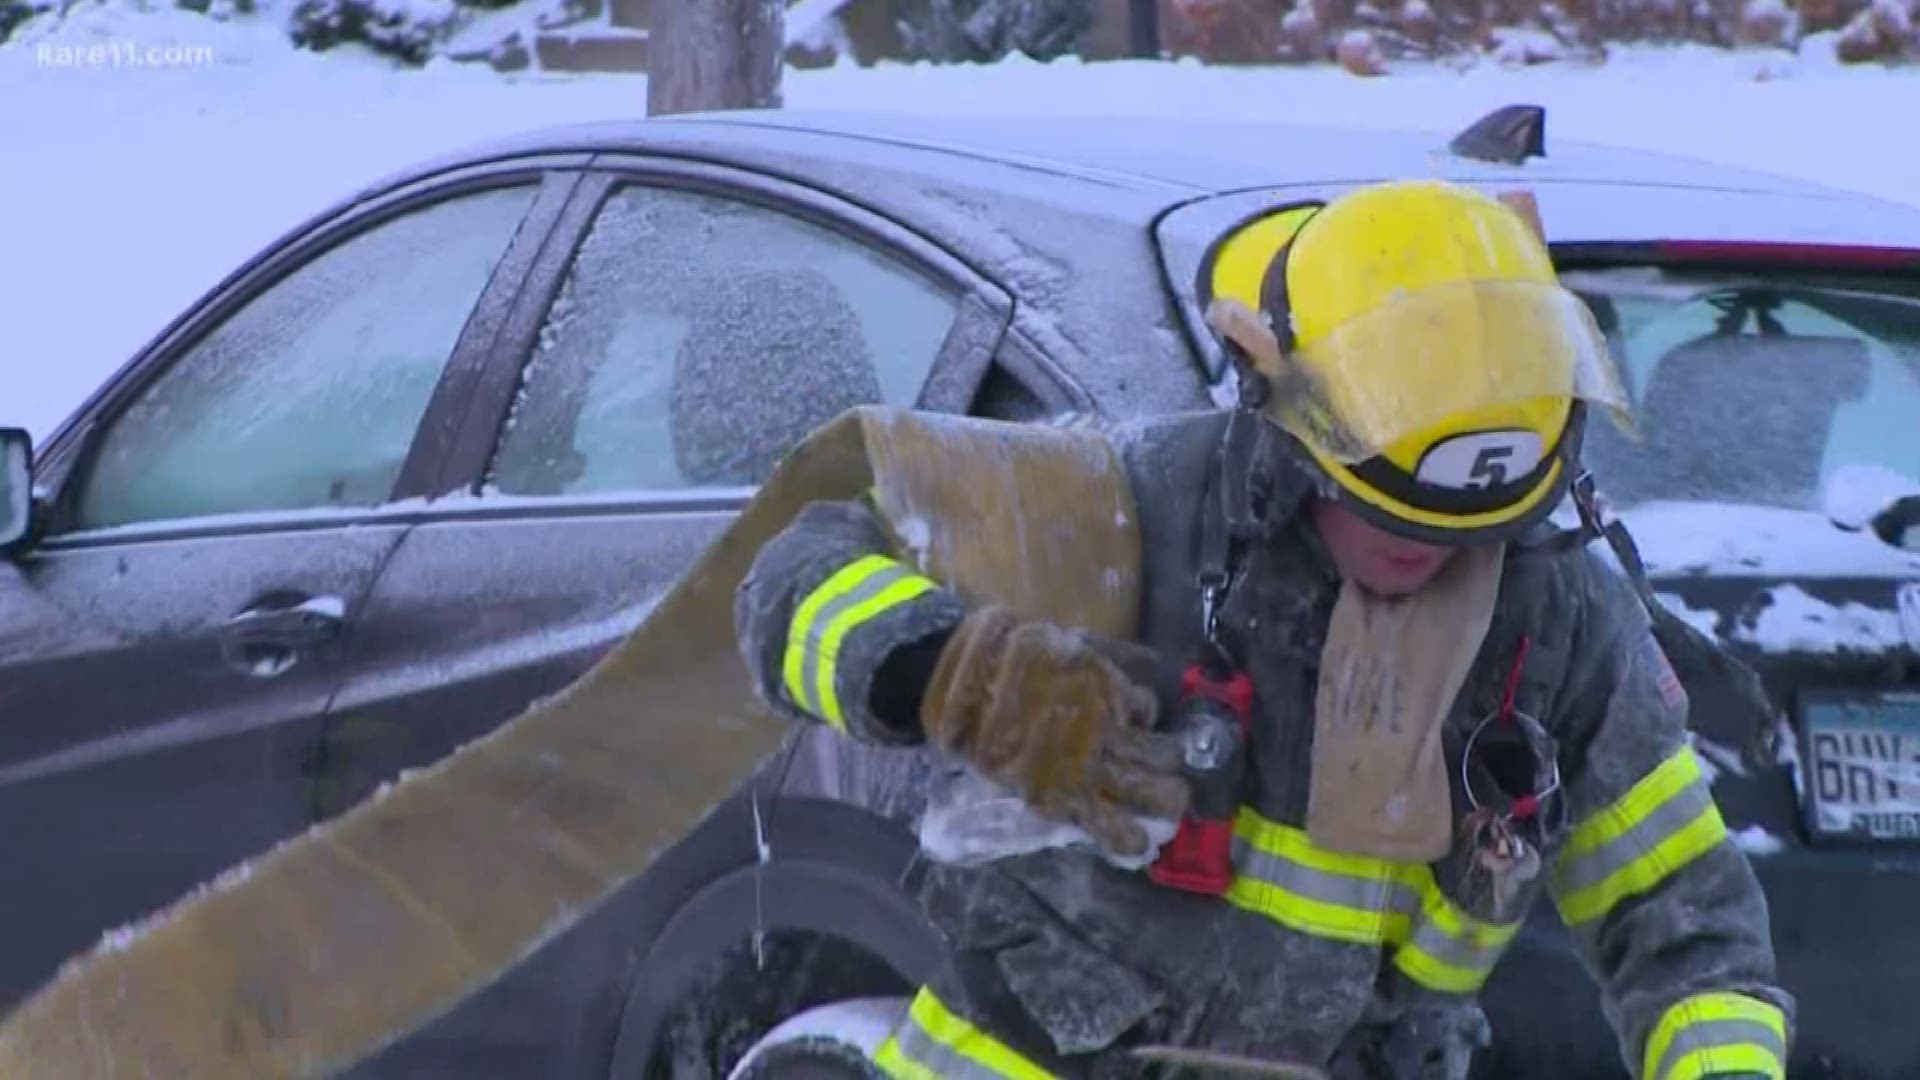 It's hard to imagine, but fire fighters do have to work through these cold snaps.
They'd like to remind all of us there are  ways to prevent fire from breaking out at your house.
Lou Raguse shares some common winter fire risks.